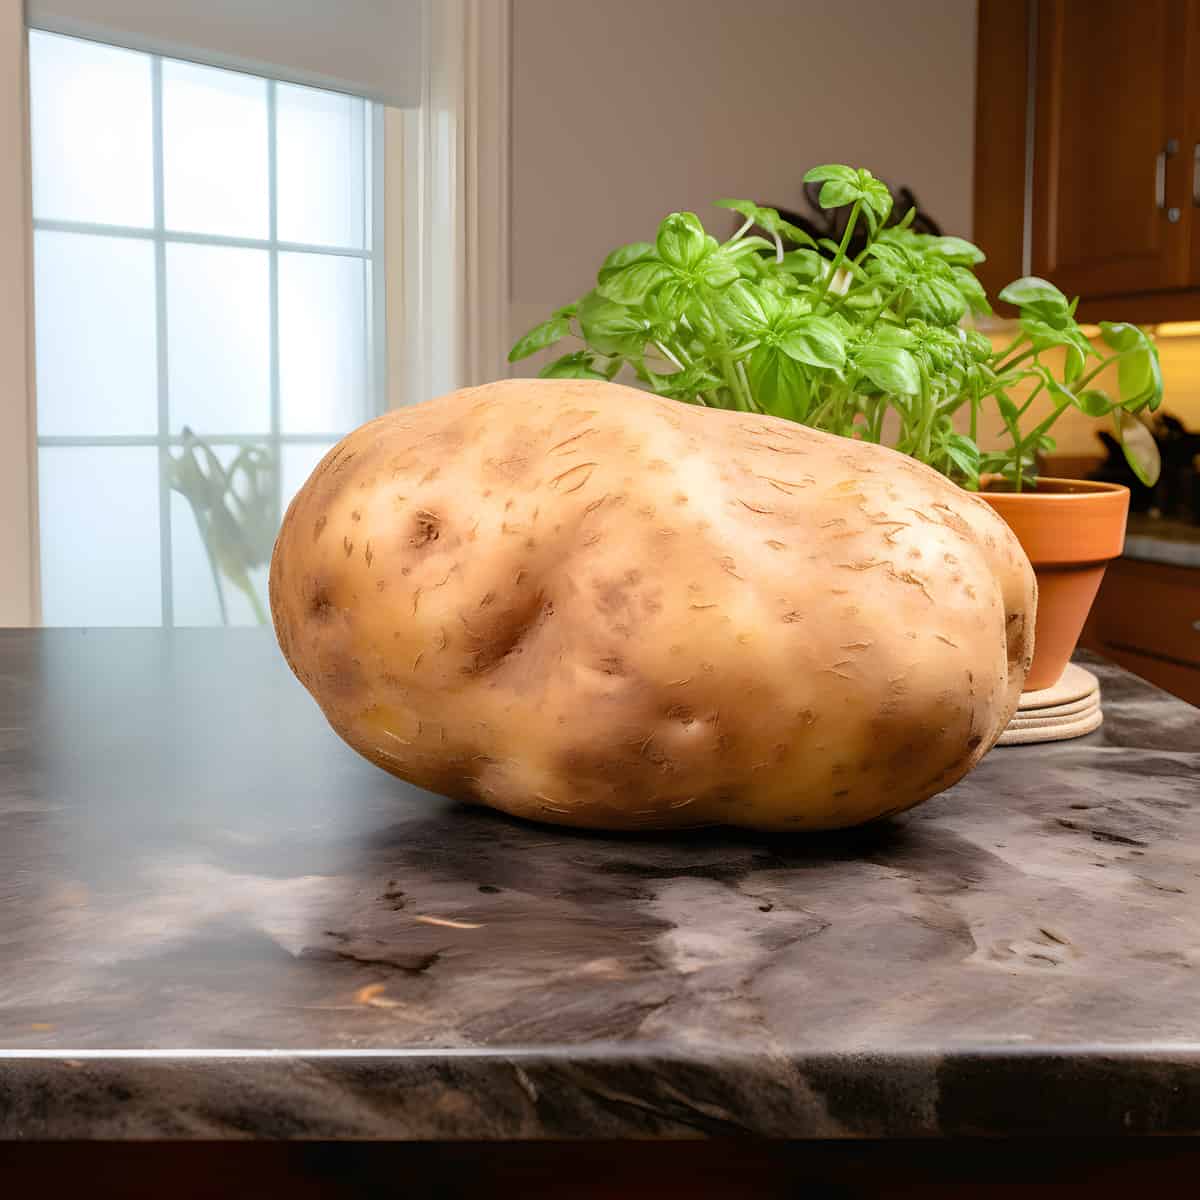 May Queen Potatoes on a kitchen counter